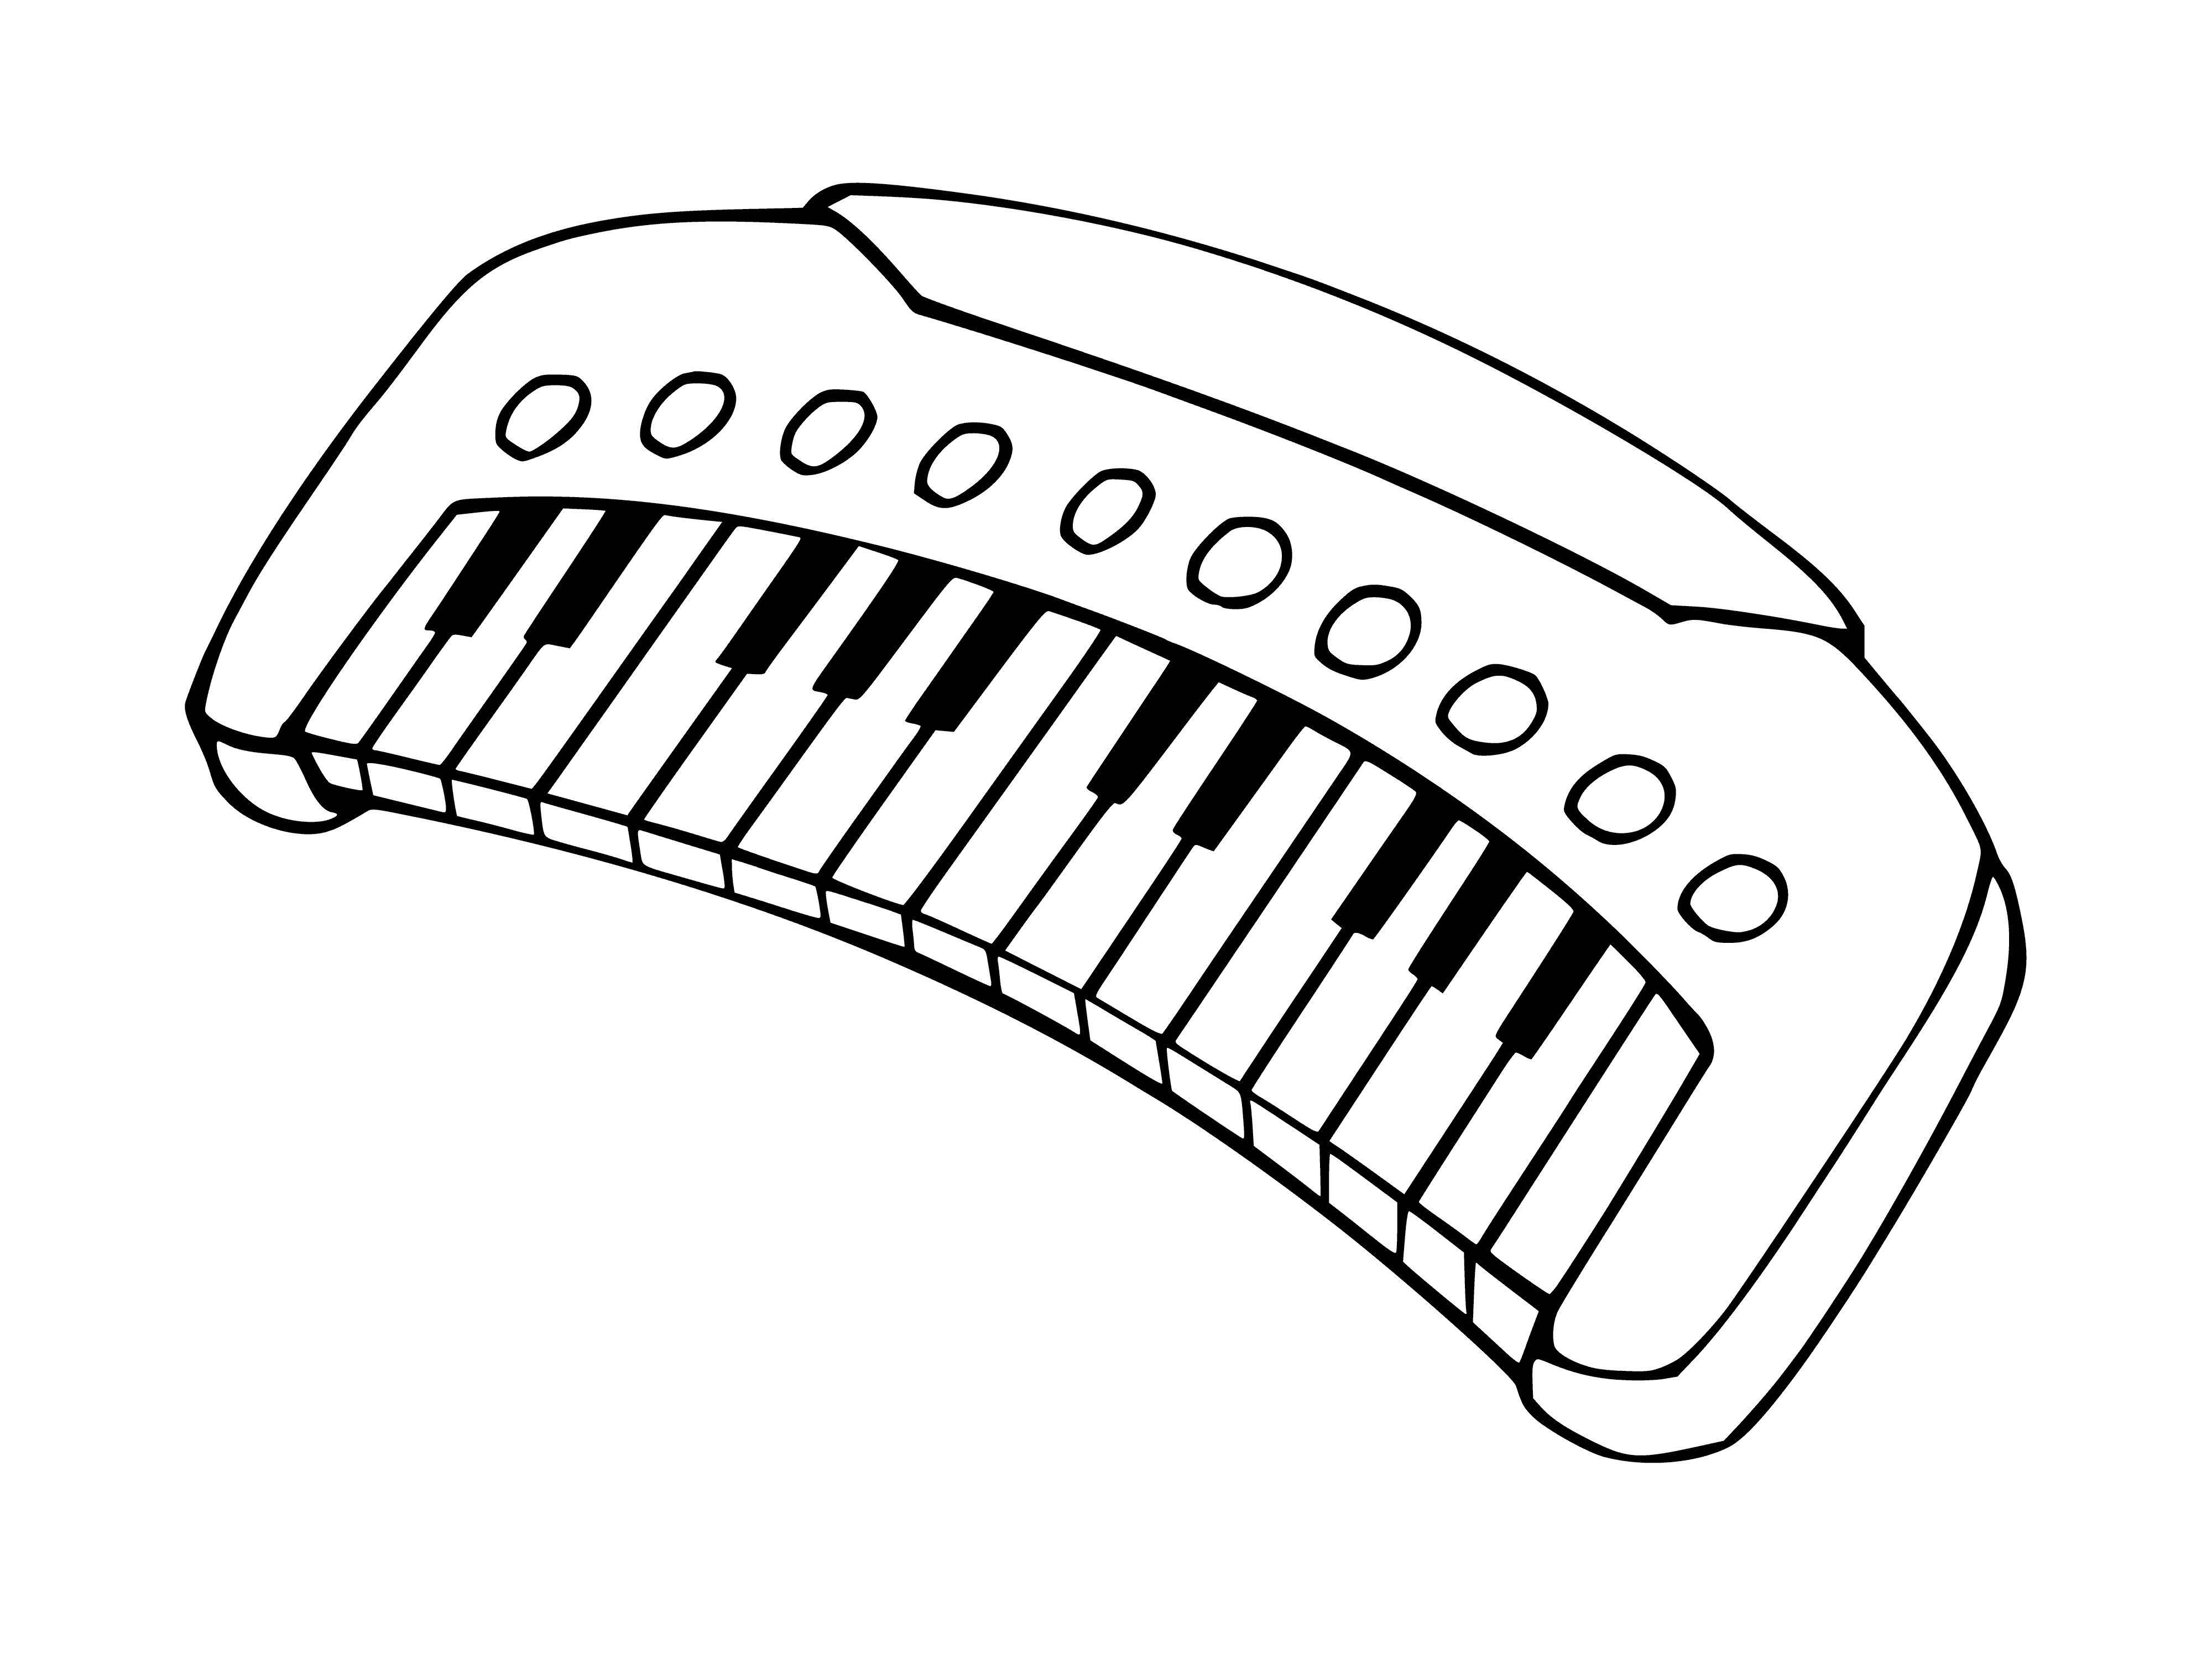 coloring page: Musical instrument that produces sound by electric signals converted to sound waves, typically played with keyboard or other input device.